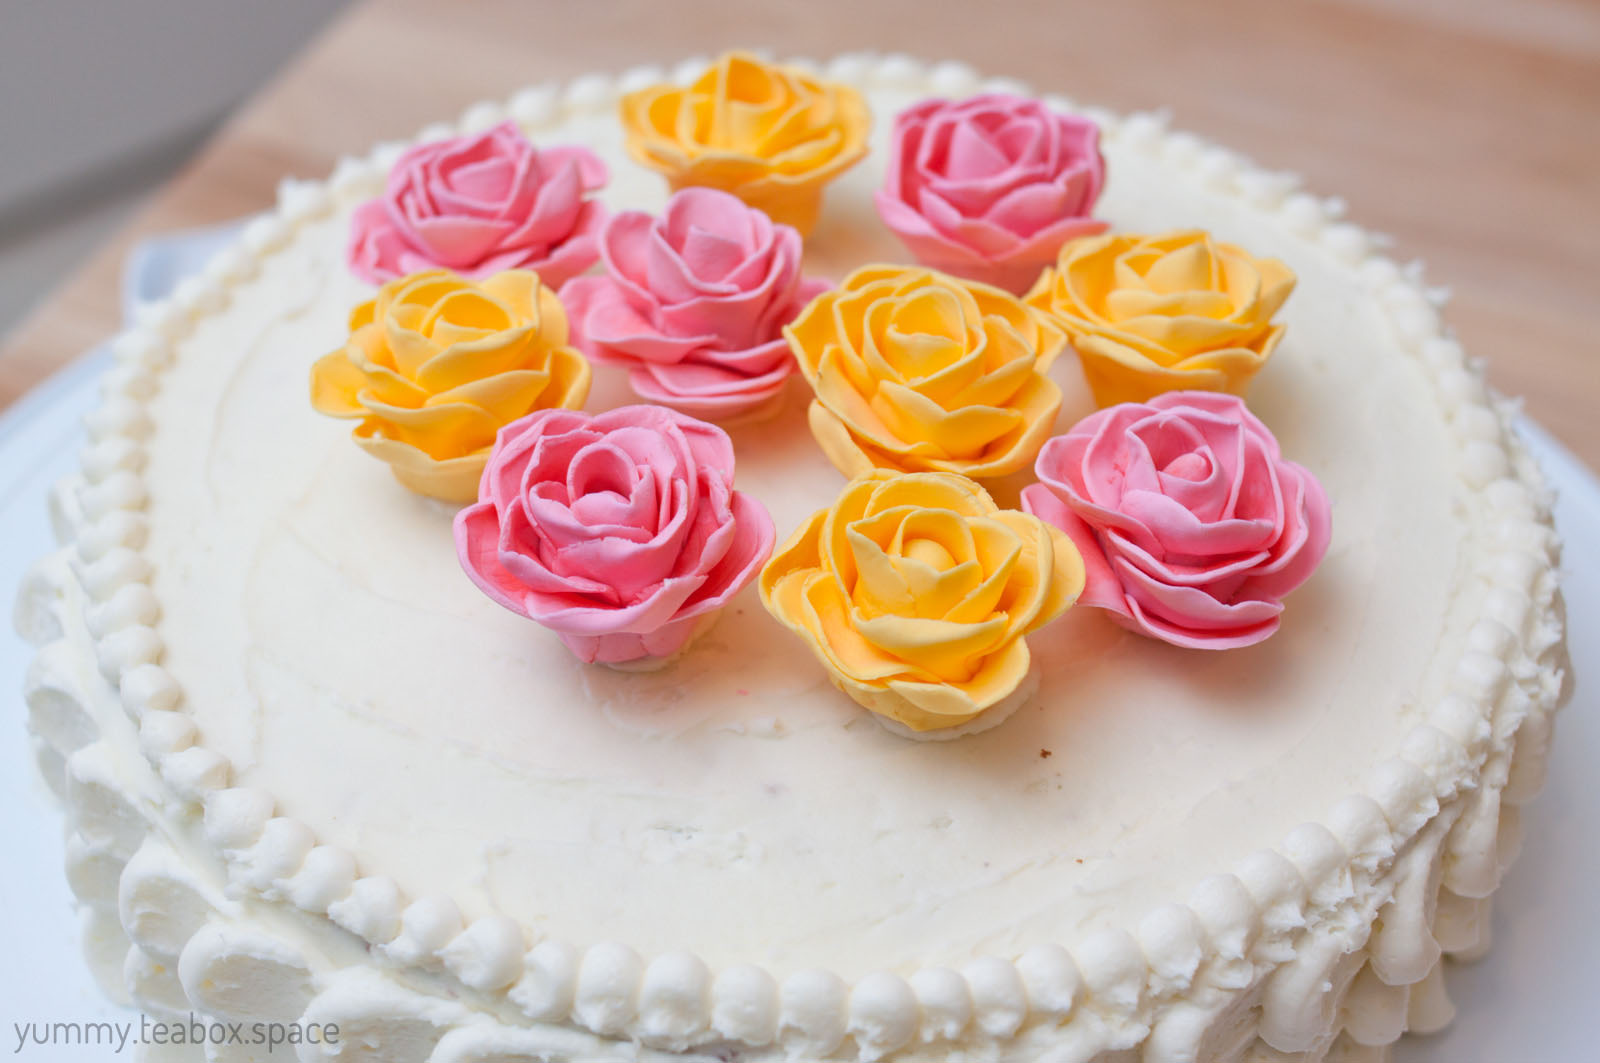 Round cake with white frosting and yellow and pink roses in the center. The edges are in a scalloped pattern.